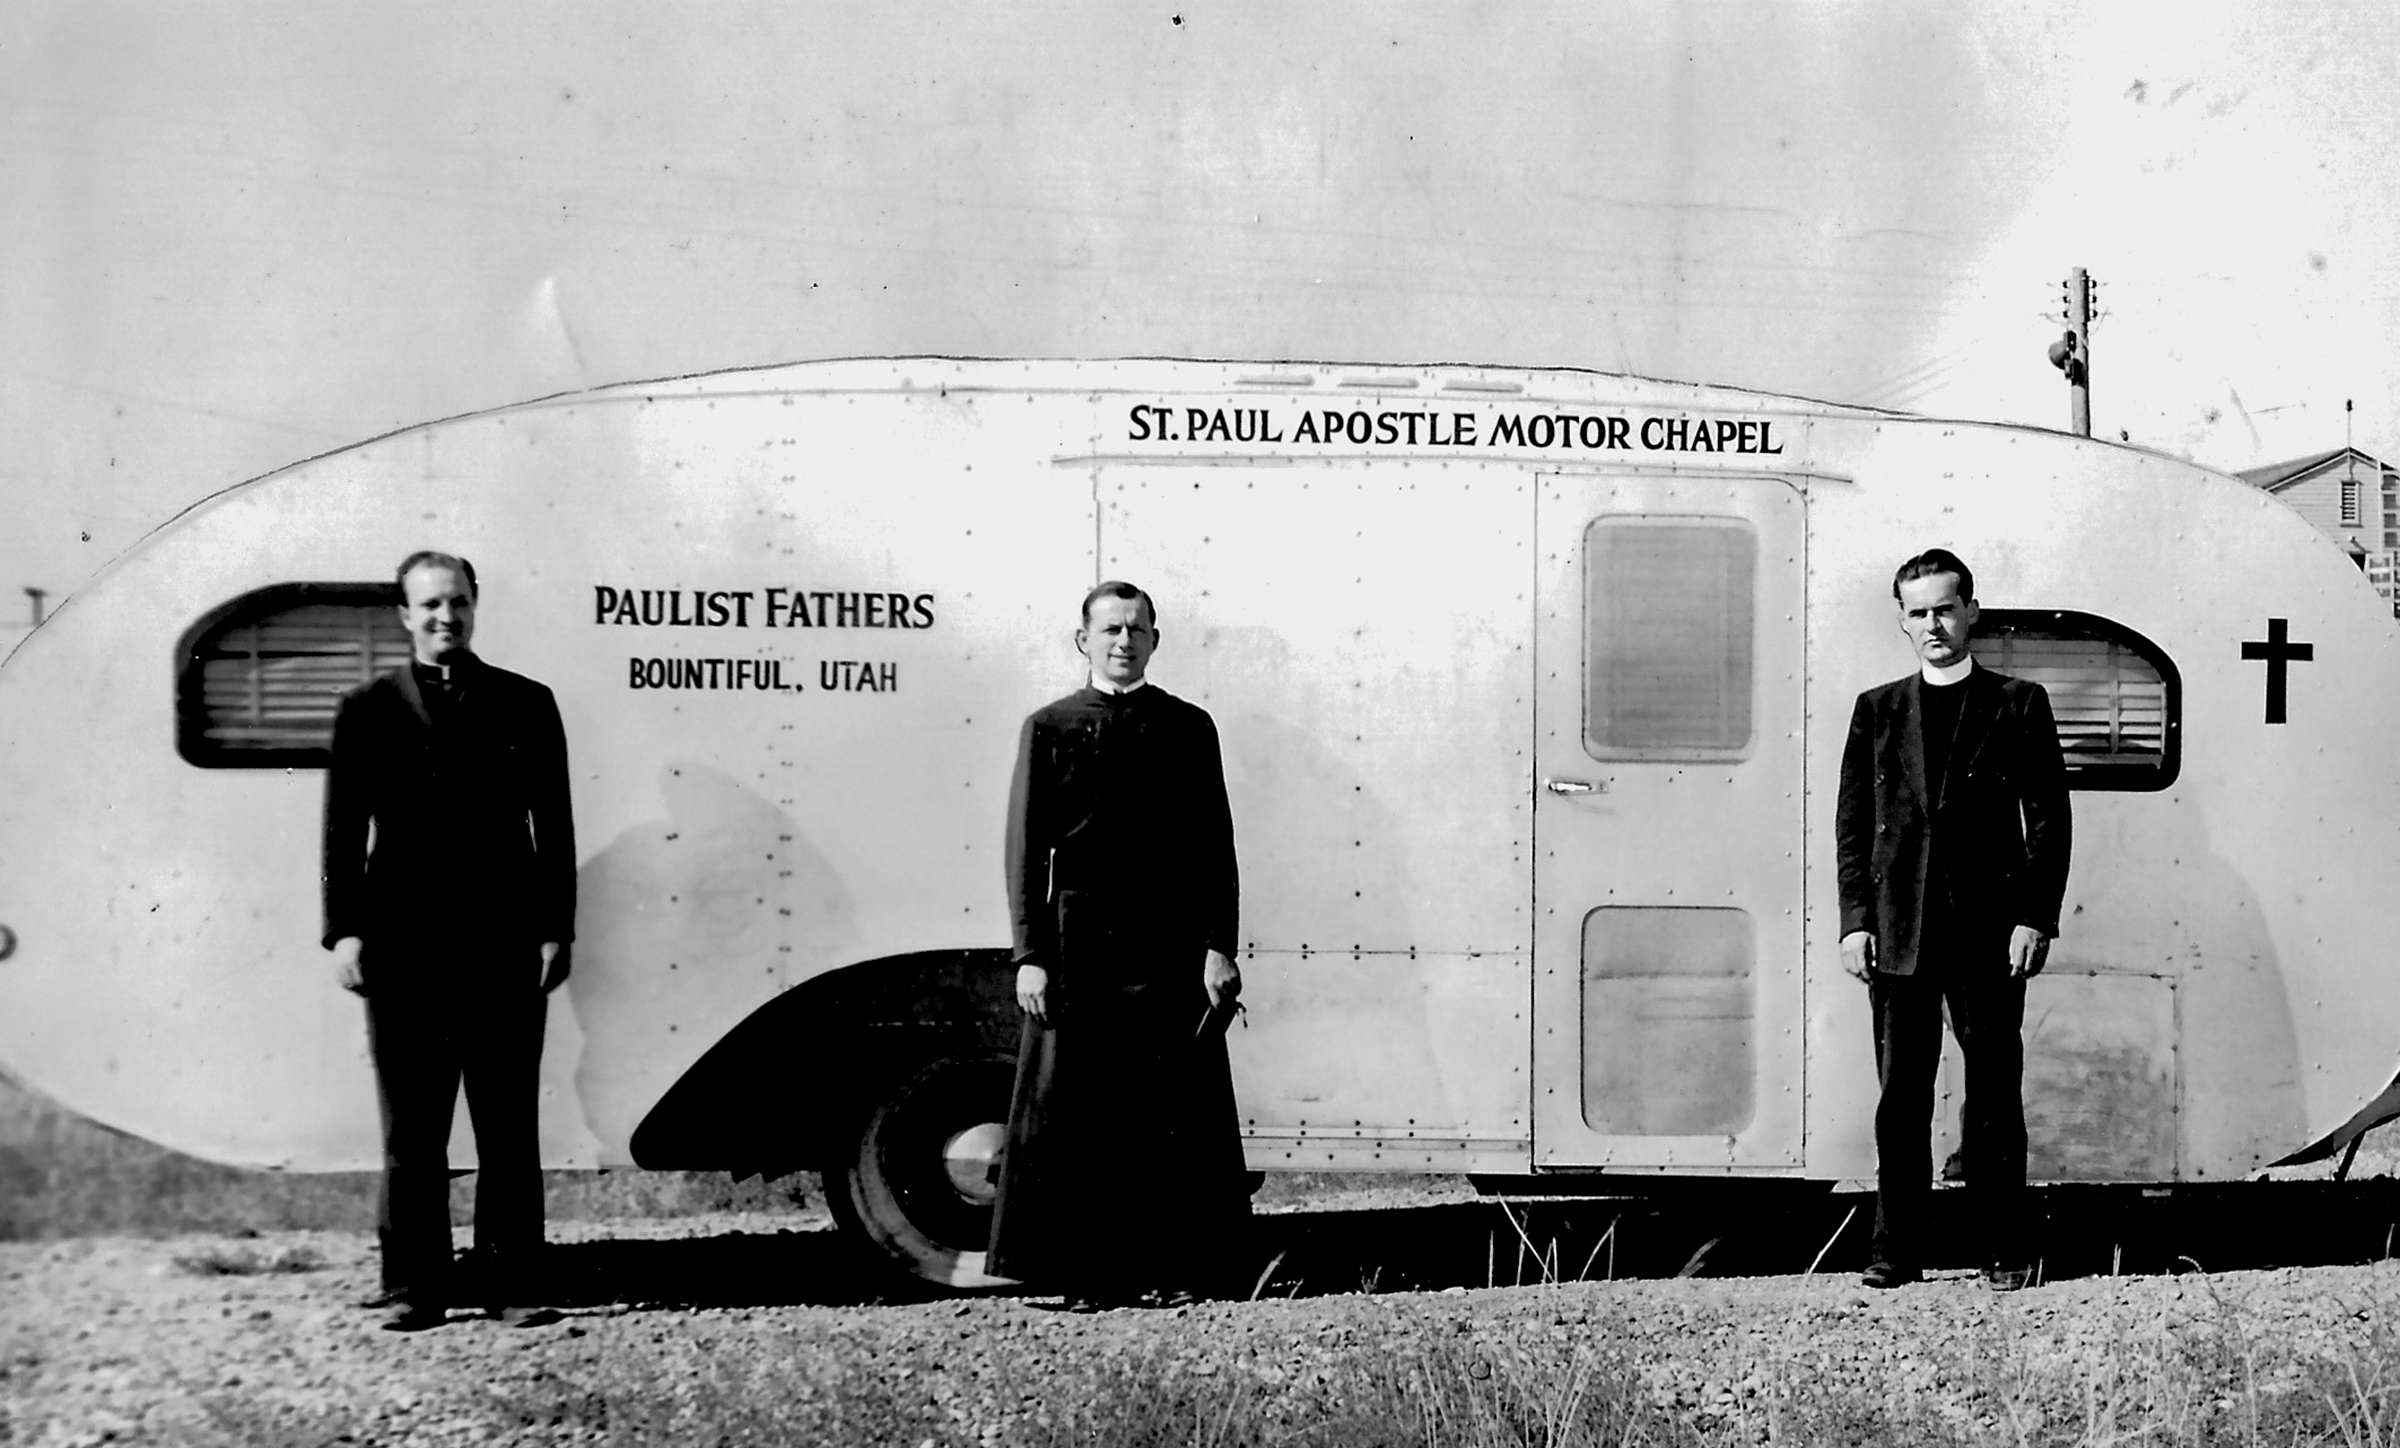 (Roman Catholic Diocese of Salt Lake City archives) The Paulist Fathers, an American missionary order, coped with the vastness of the state by bringing "church" to dispersed Catholics, outfitting a trailer in 1938 as a "motor chapel."